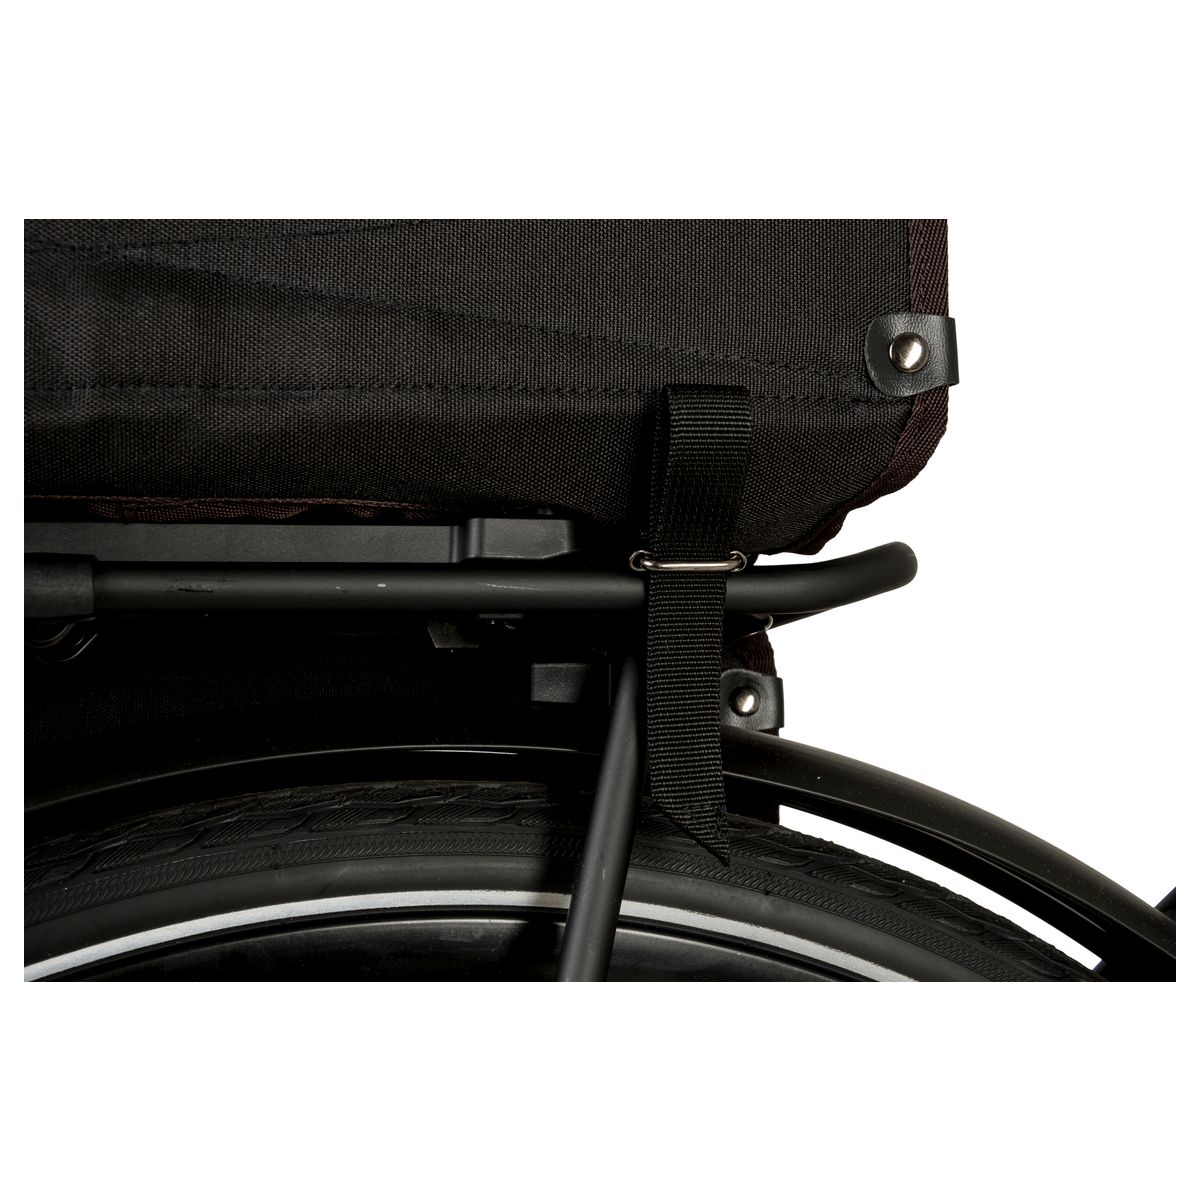 Fastrider Isas Double Bike Bag Trend fit example